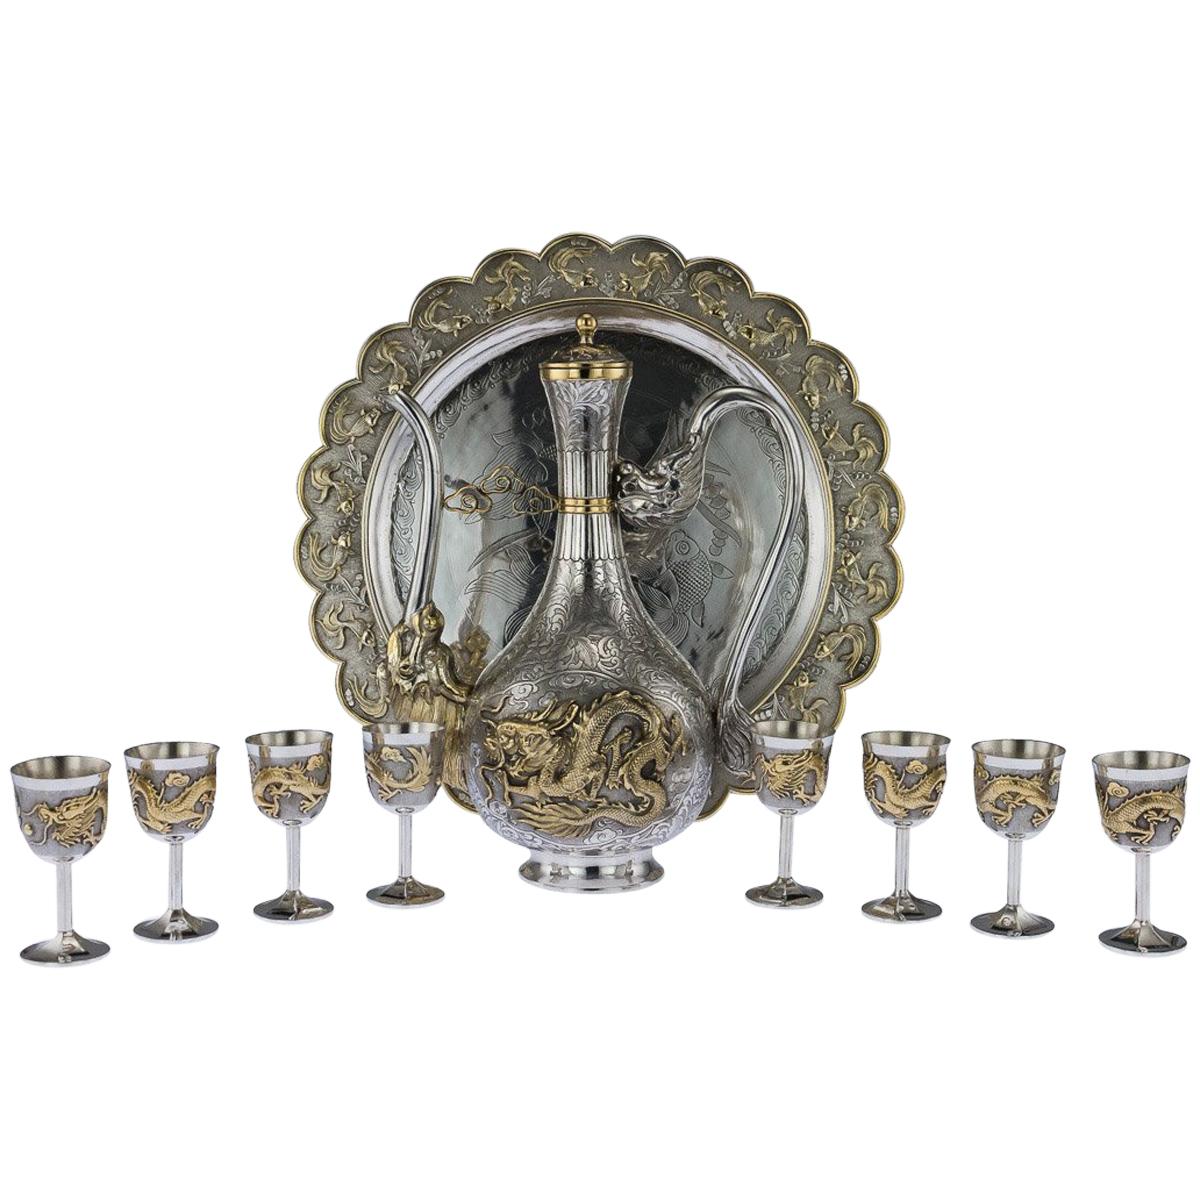 Exceptional 20th Century Chinese Solid Silver Gilt Sake Set on Tray, circa 1960